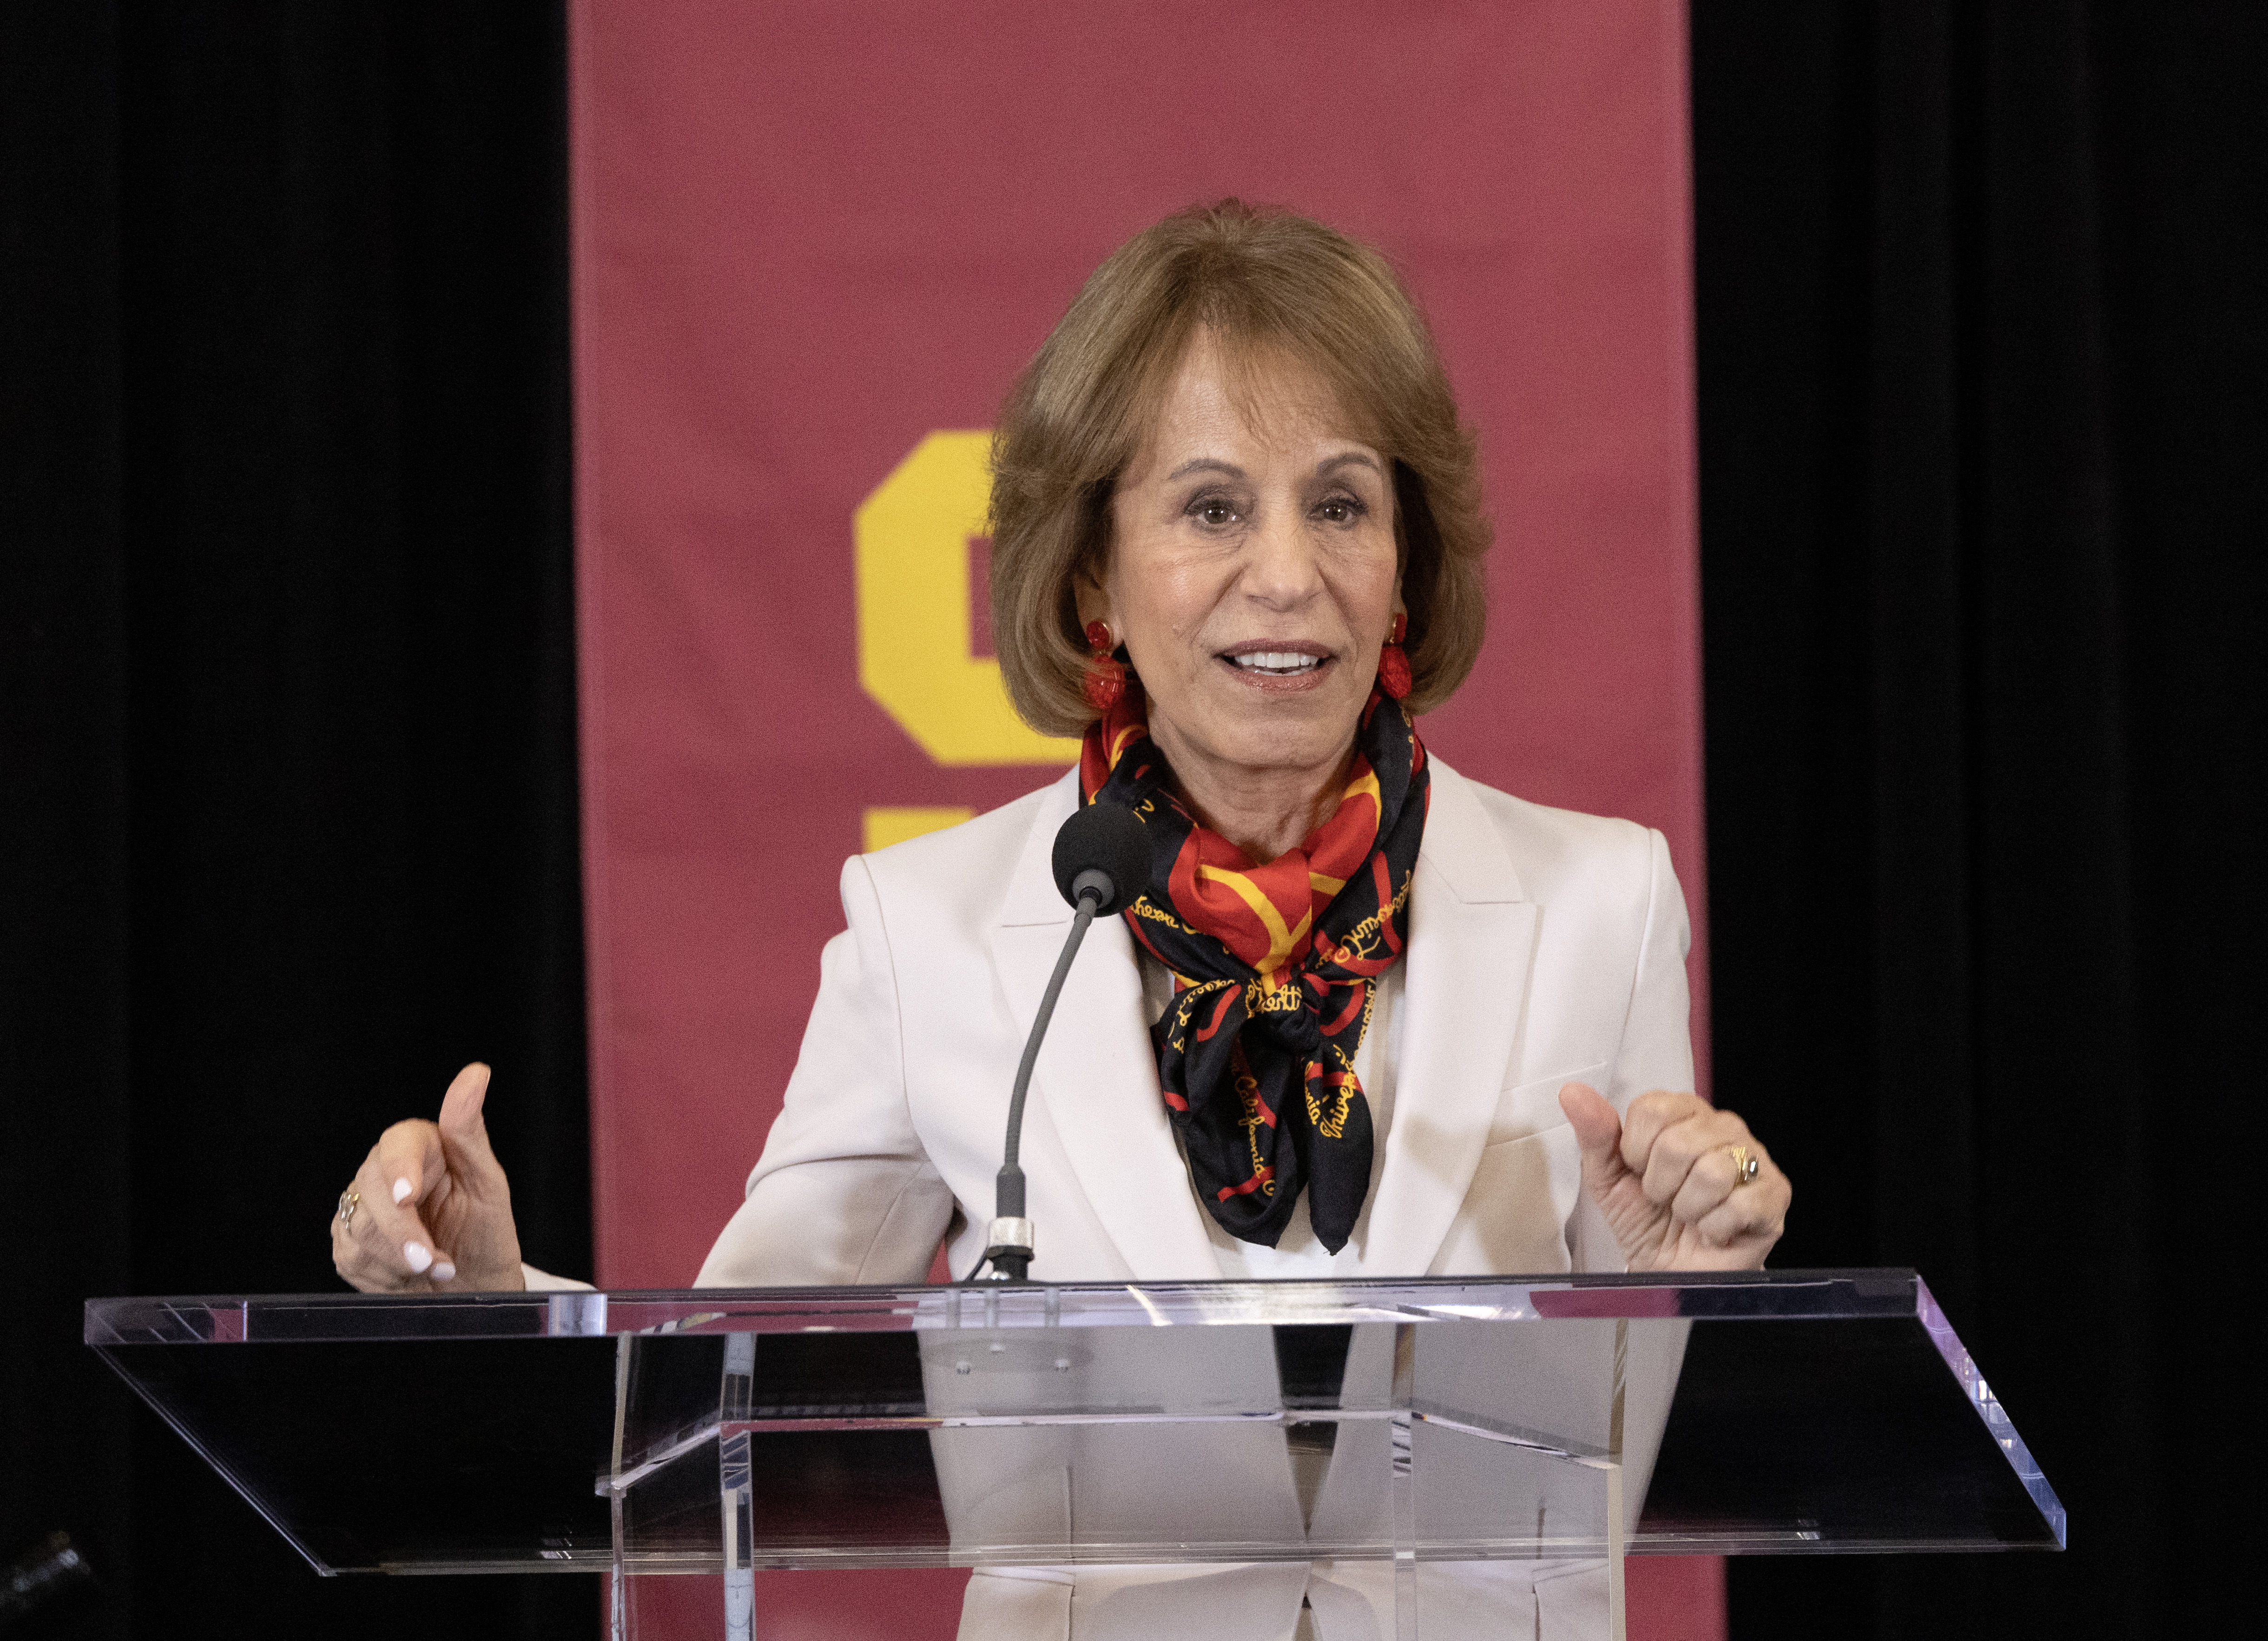 University of Southern California President Carol Folt speaks during a press conference on April 5 at Albert J. Centofante Hall of Champions at Galen Center in Los Angeles, California.